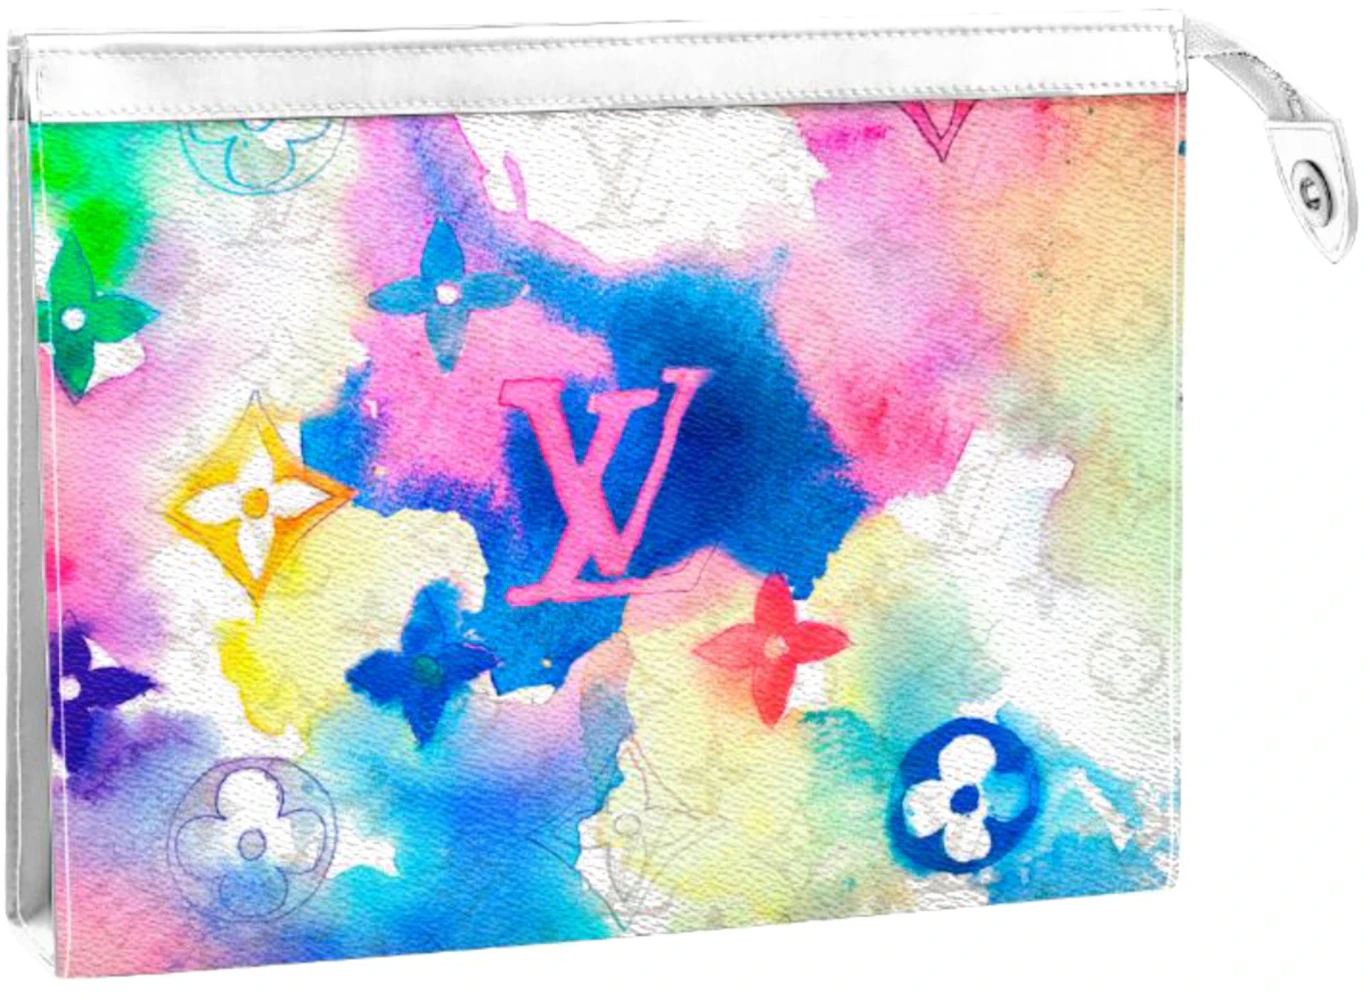 Products by Louis Vuitton: Tee Shirt Watercolor Monogram